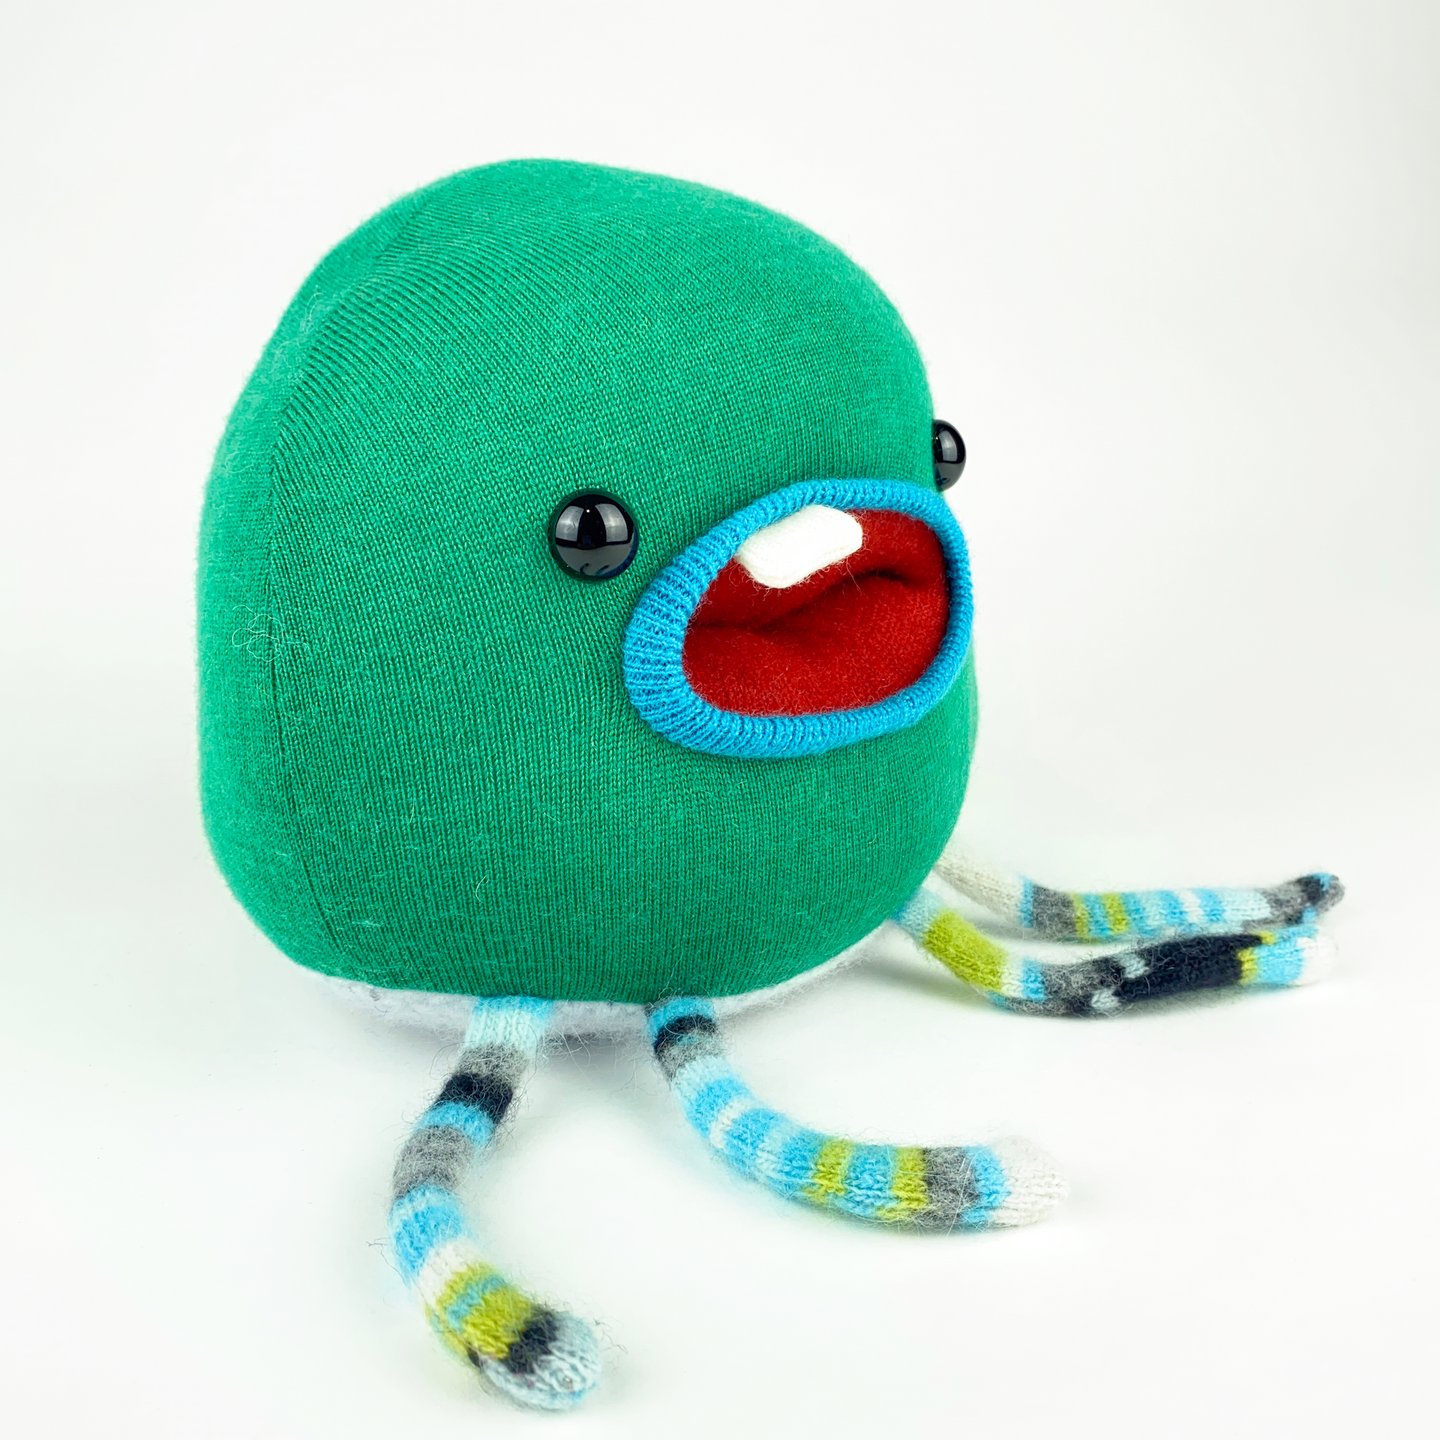 Warble the green plush friendly monster